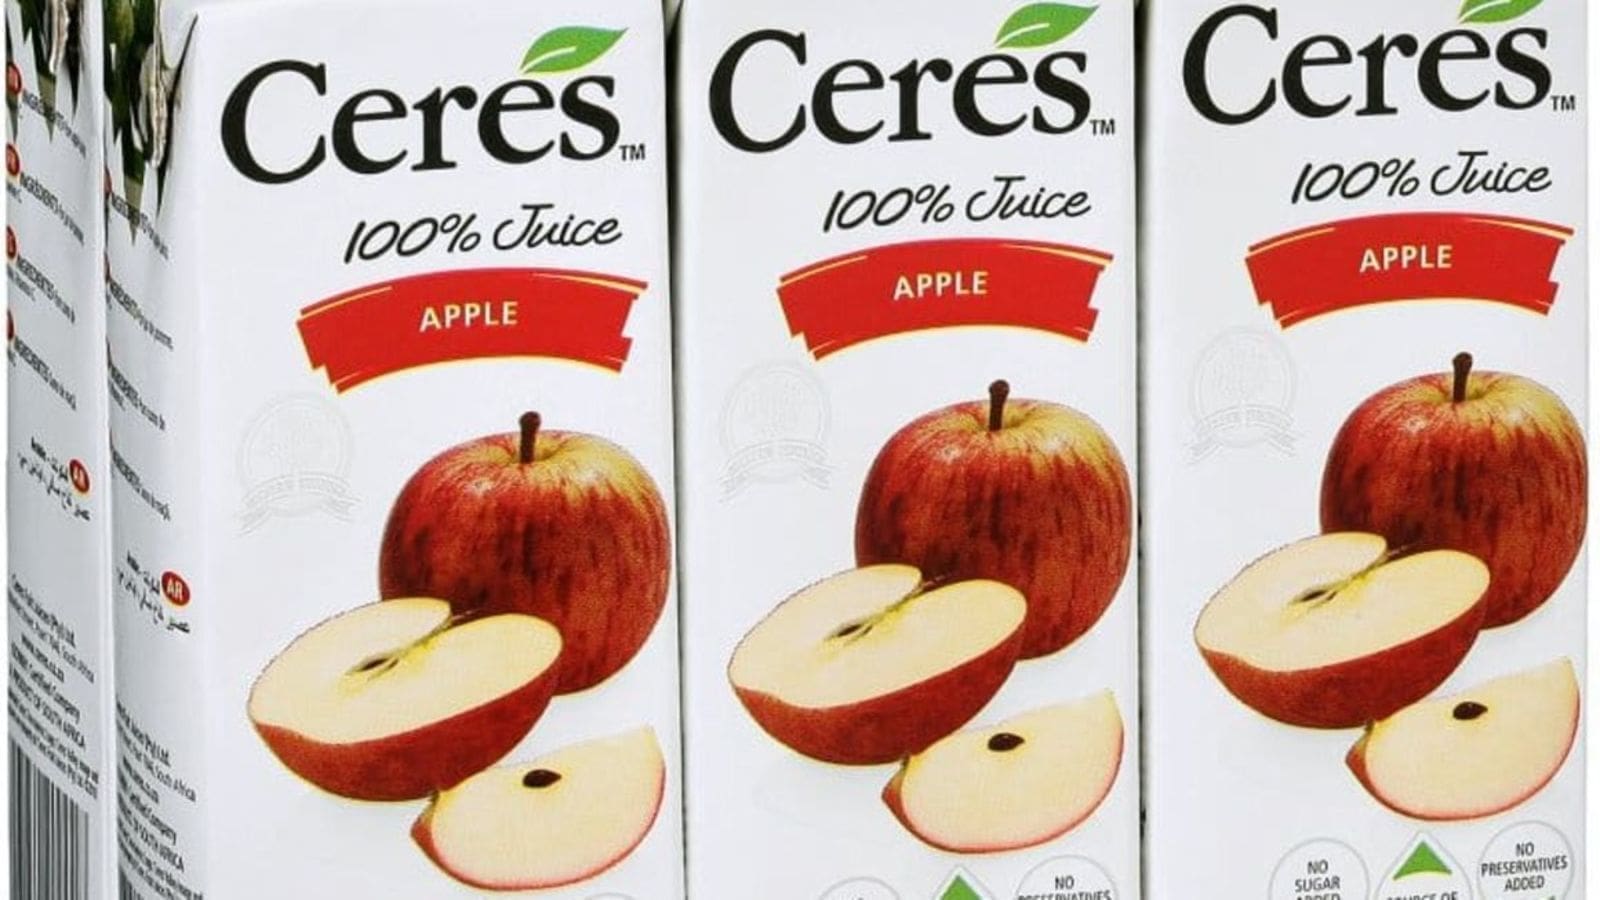 Tanzania Bureau of Standards claims Ceres apple juice might have been bootlegged into country